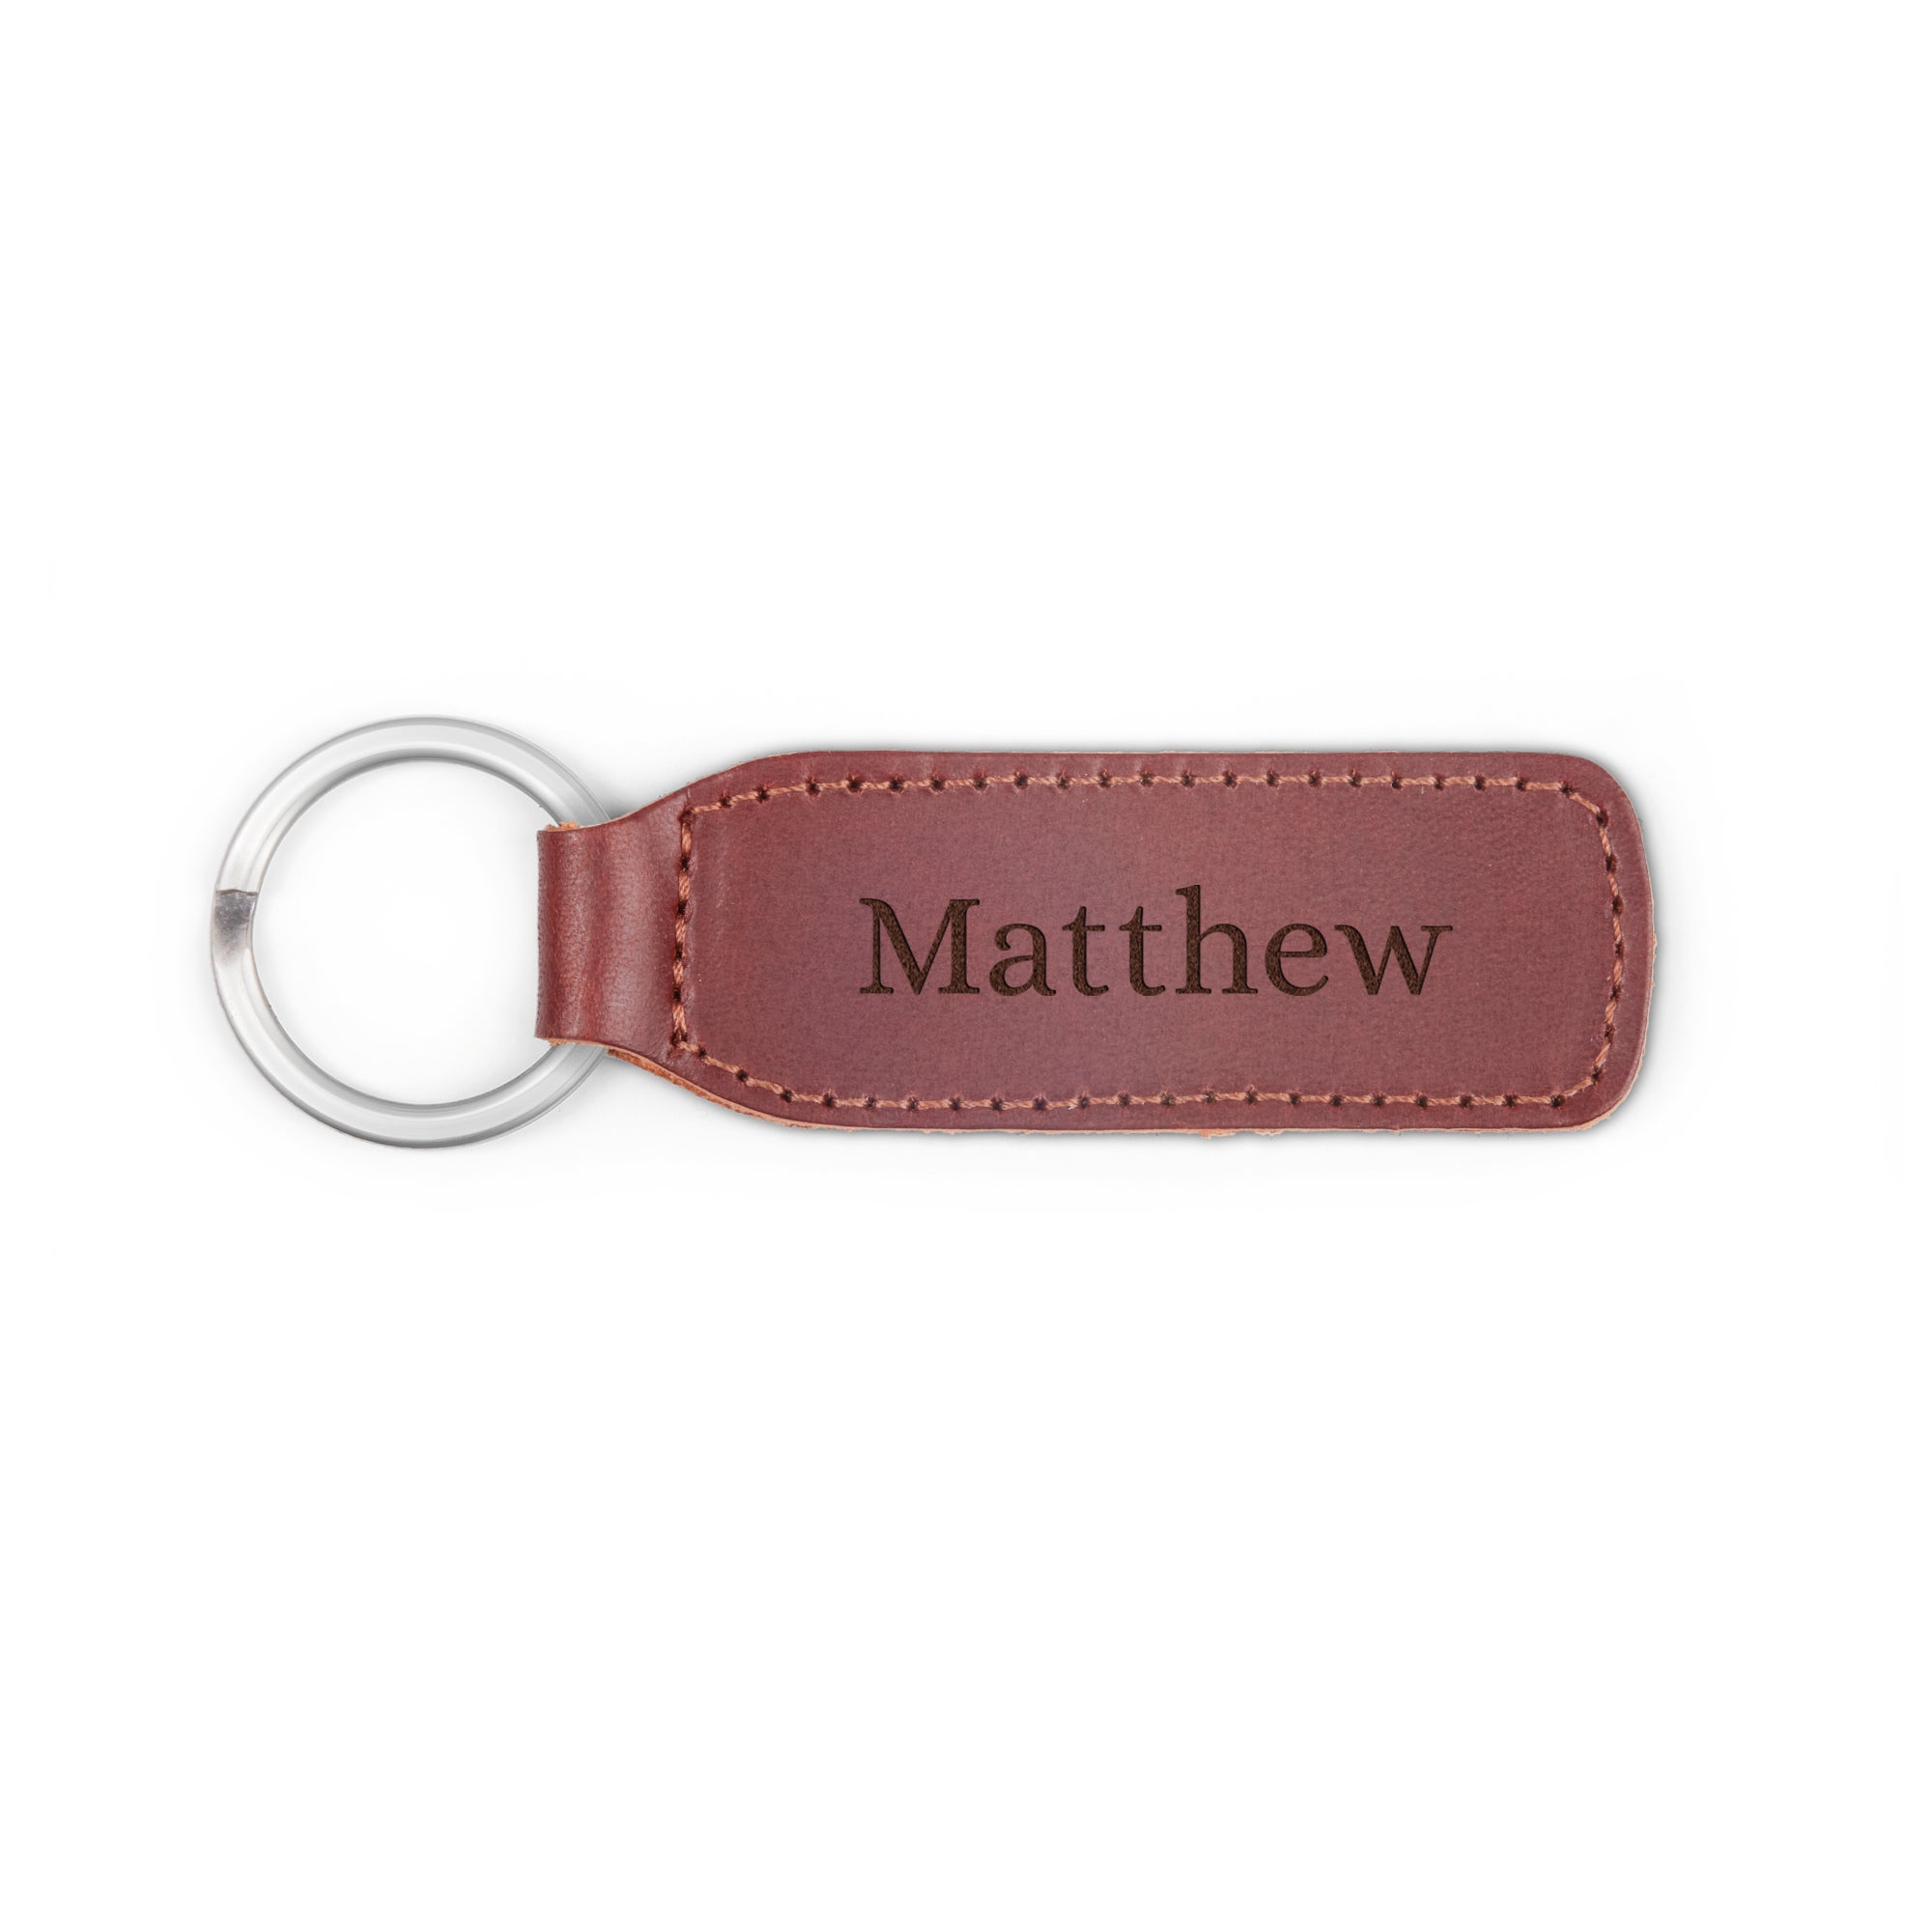 Personalised key ring - Leather - Brown - Engraved